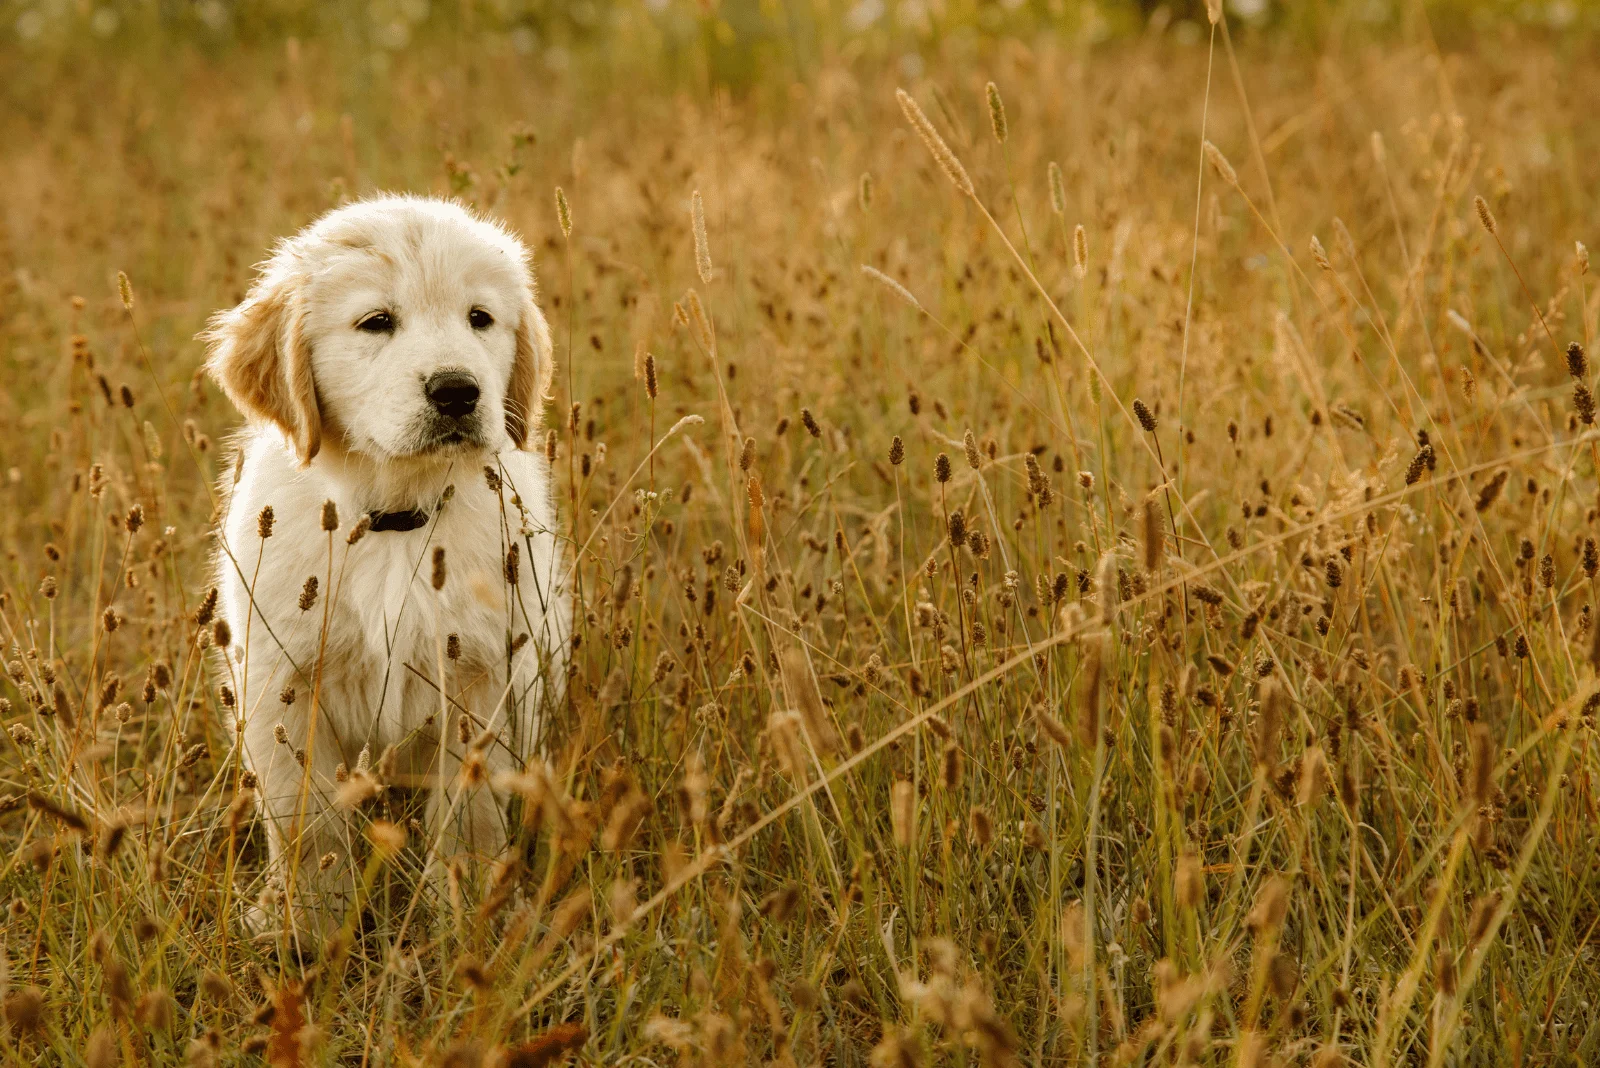 A golden retriever puppy is standing on the grass and looking into the distance